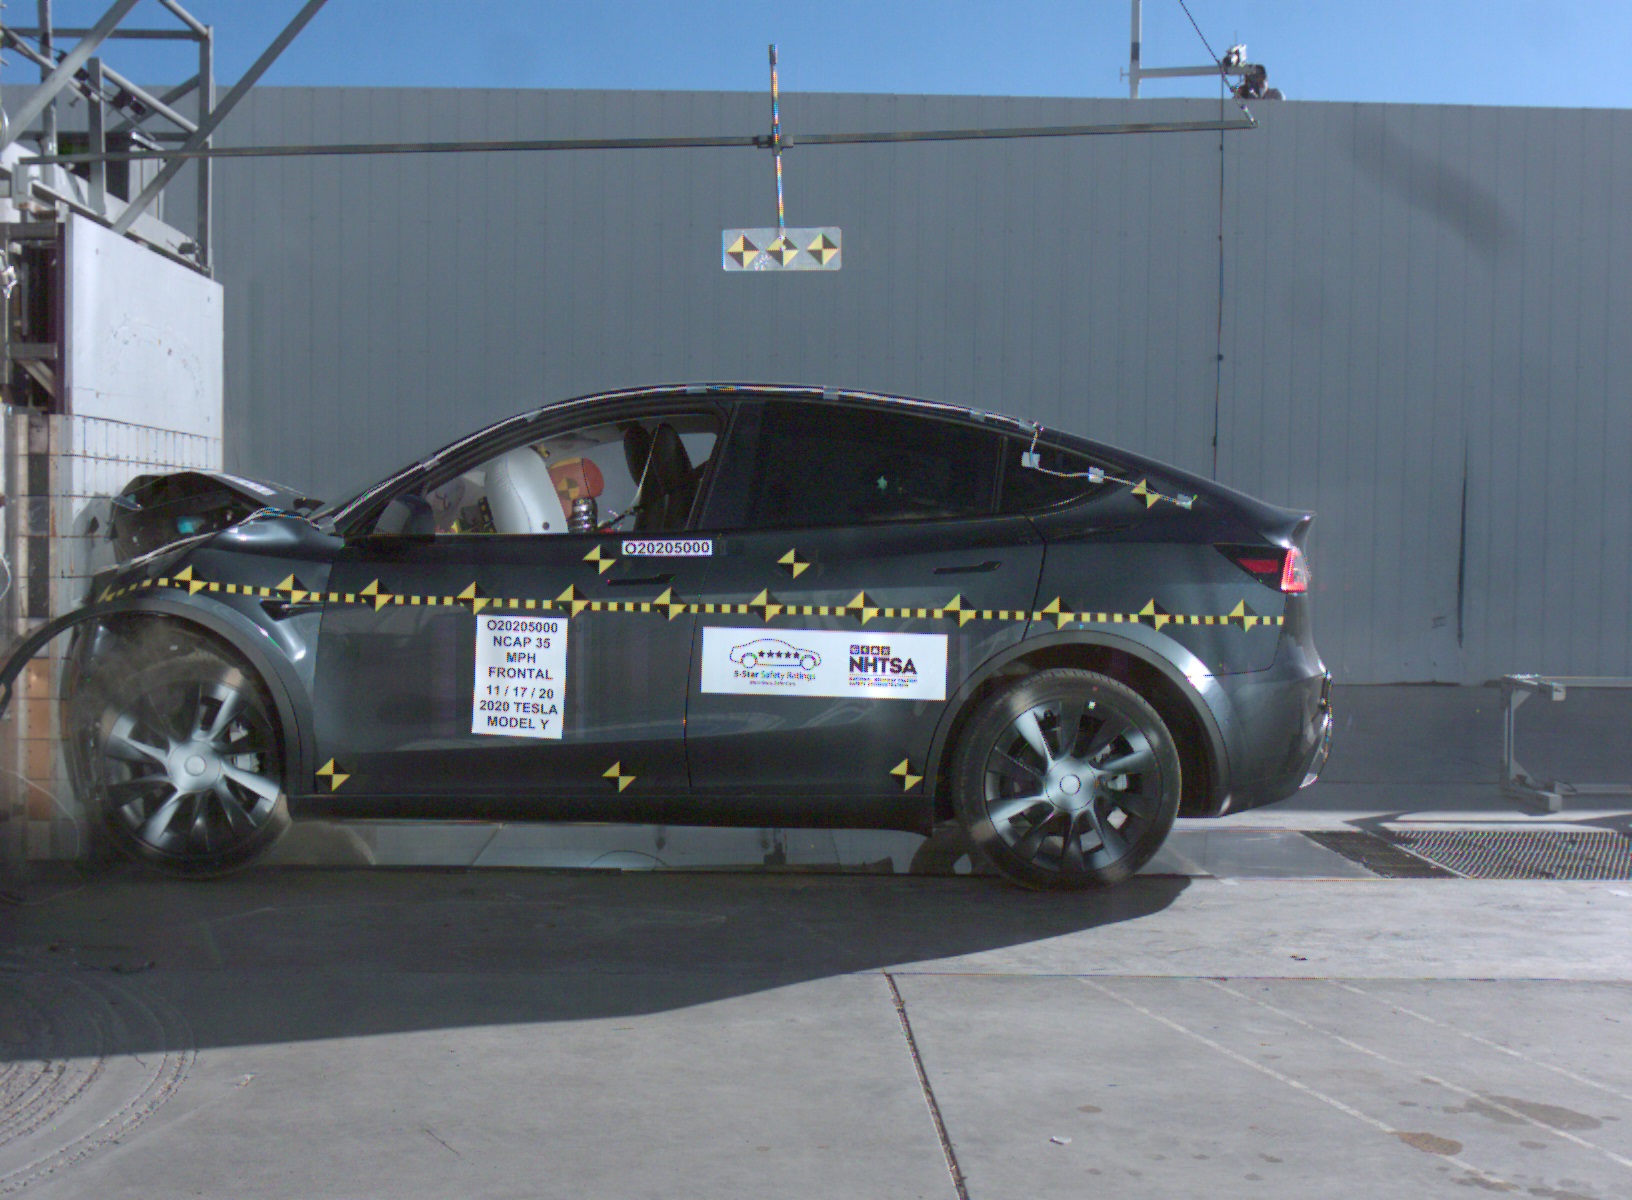 NHTSA looks into reports that Tesla added crash test code into vehicle software